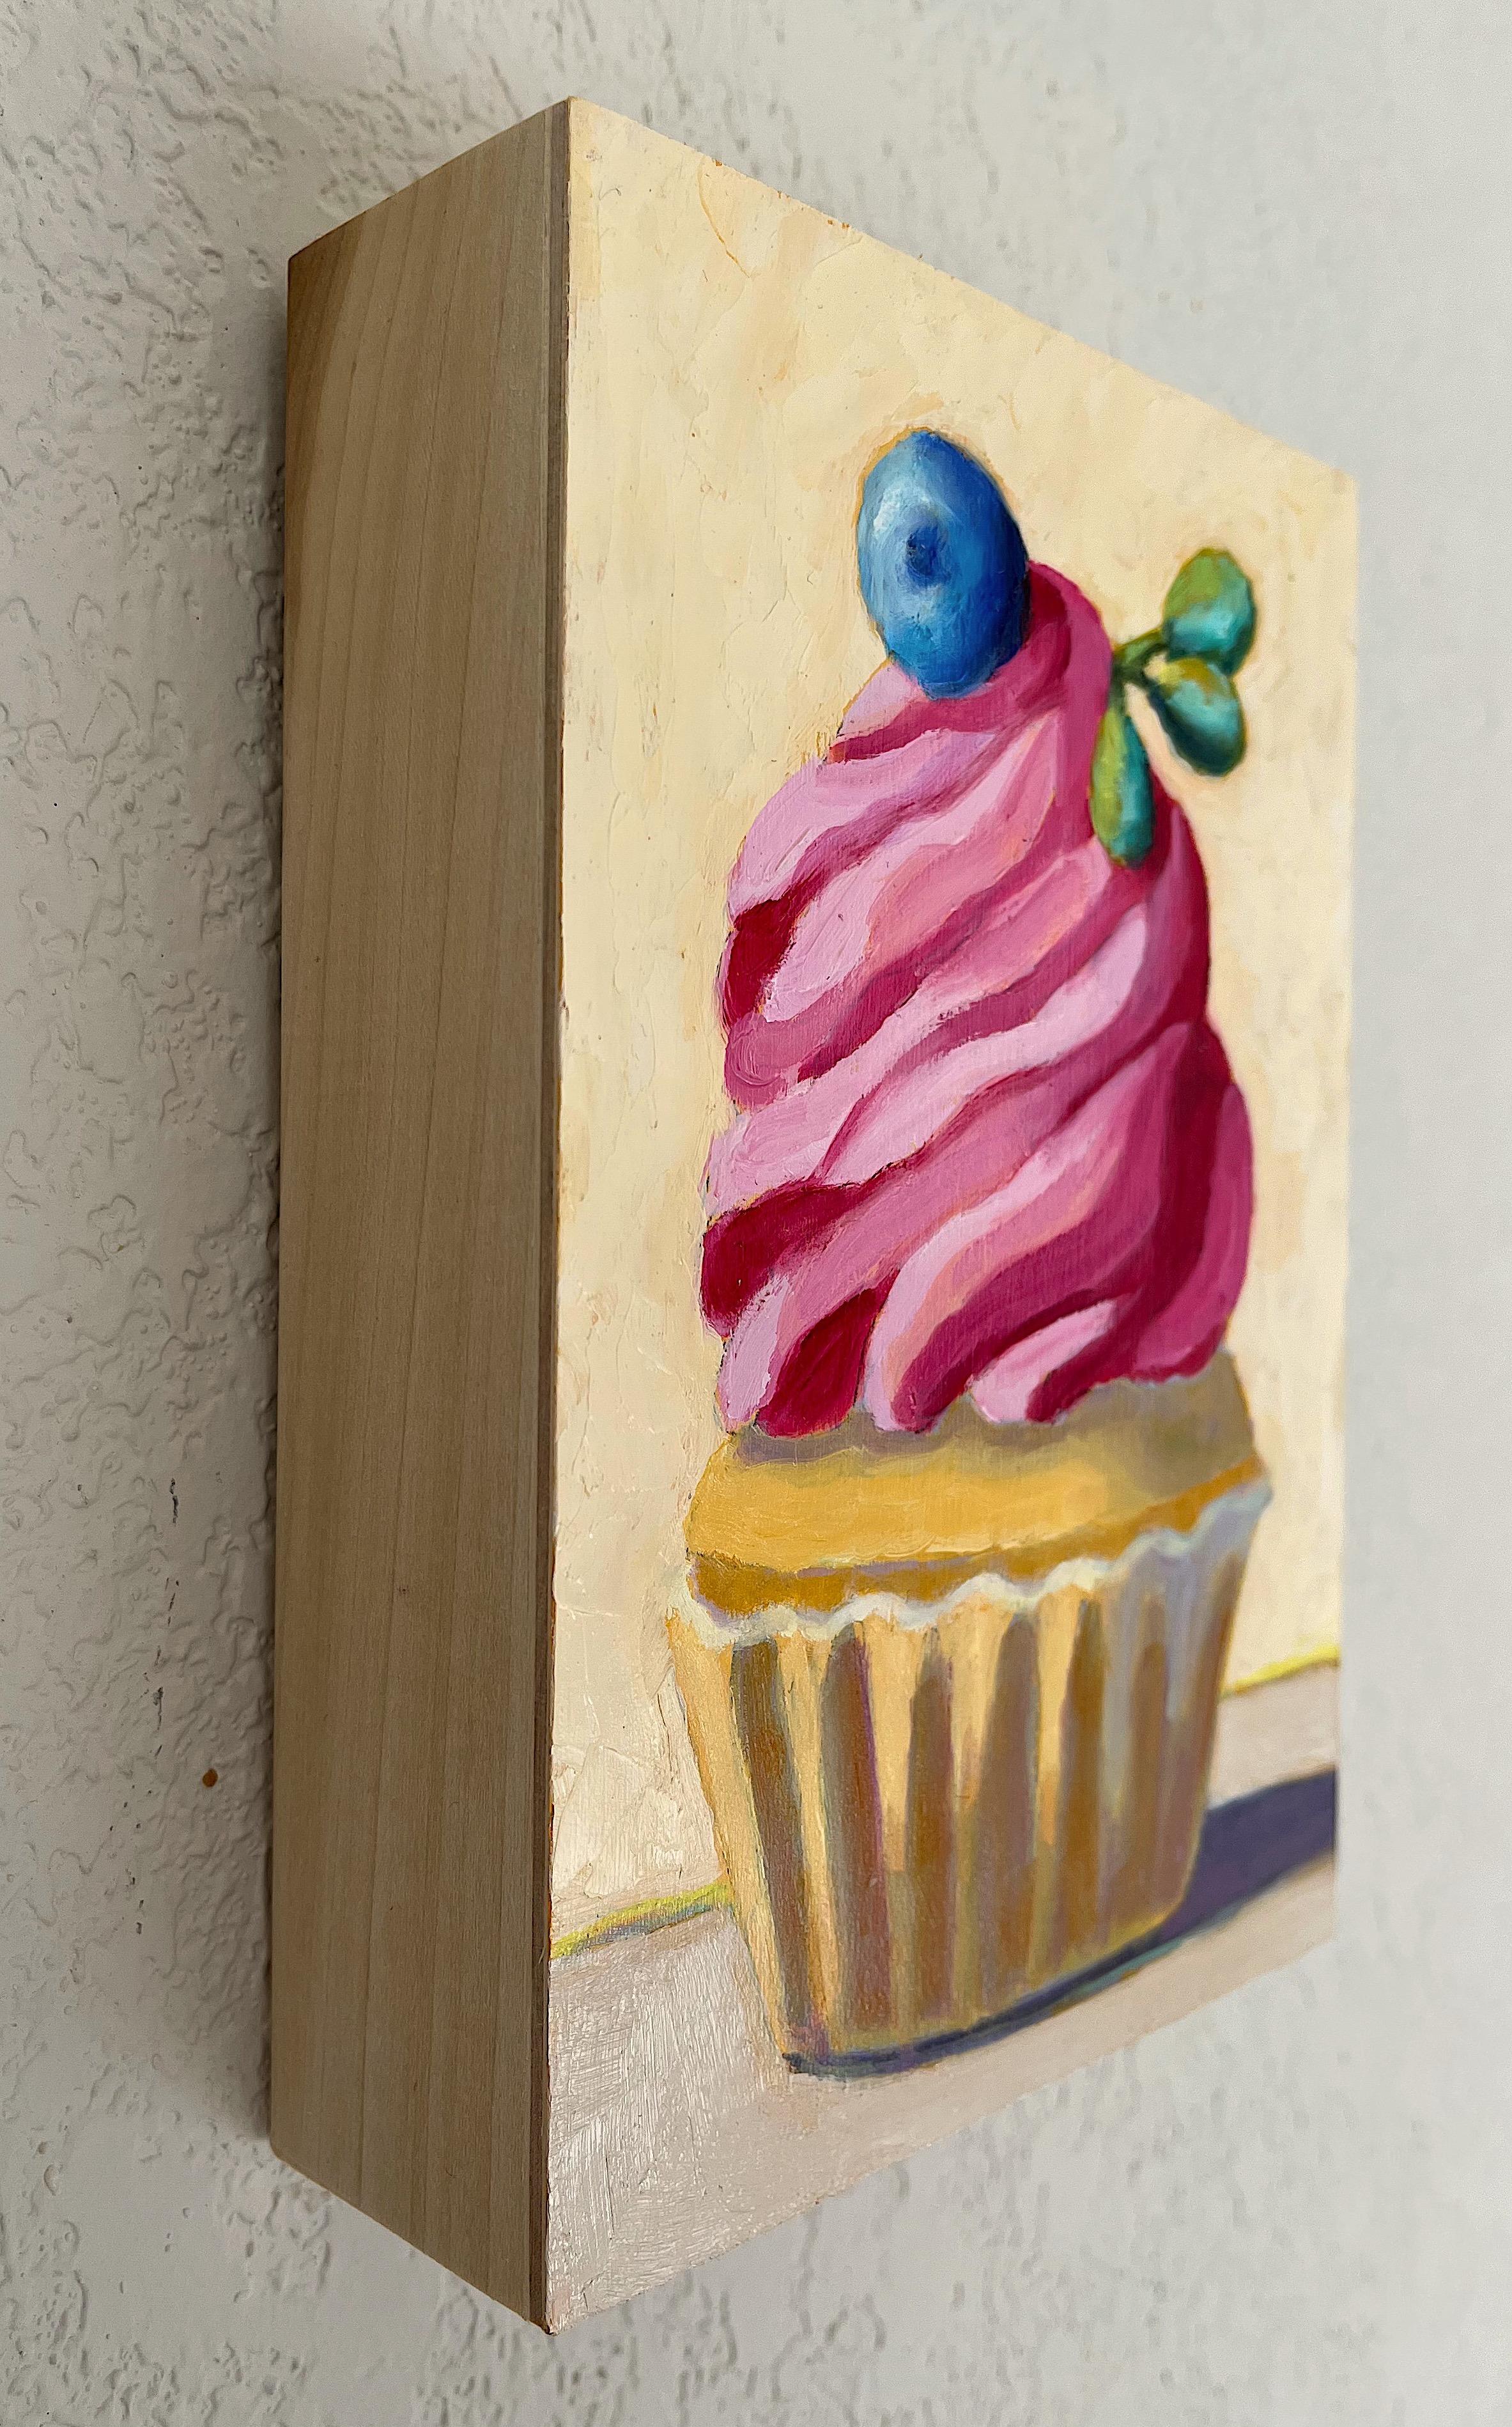 <p>Artist Comments<br>A raspberry swirl cupcake, topped with mint and blueberry, serves as a creamy delight in this still-life painting. The vibrant frosting and garnish stand out against the beige backdrop. Drawing inspiration from her background